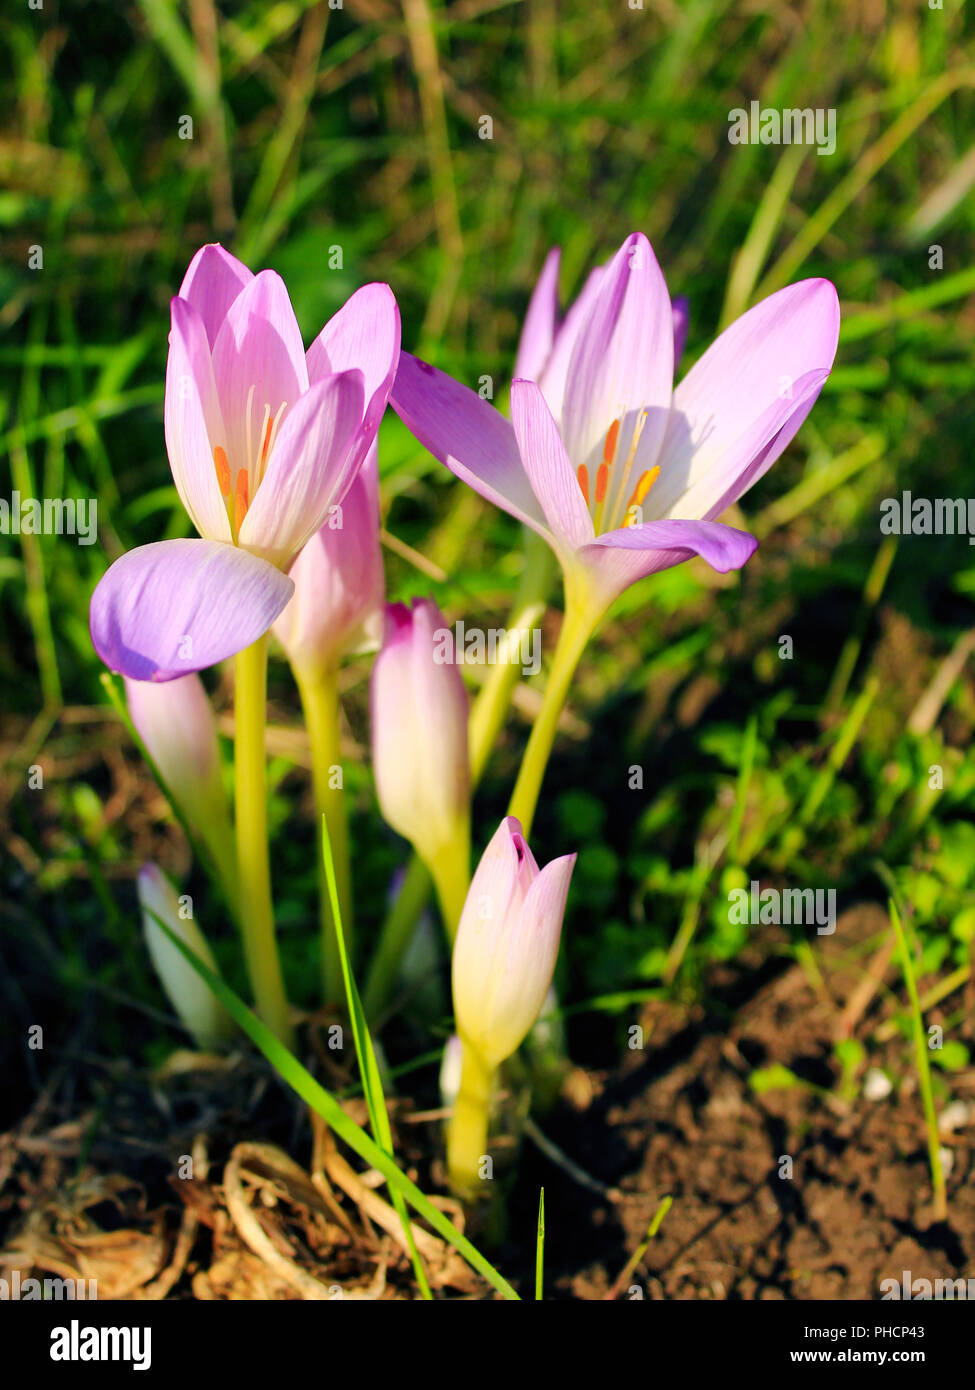 pink flowers of Colchicum autumnale blossoming in September Stock Photo